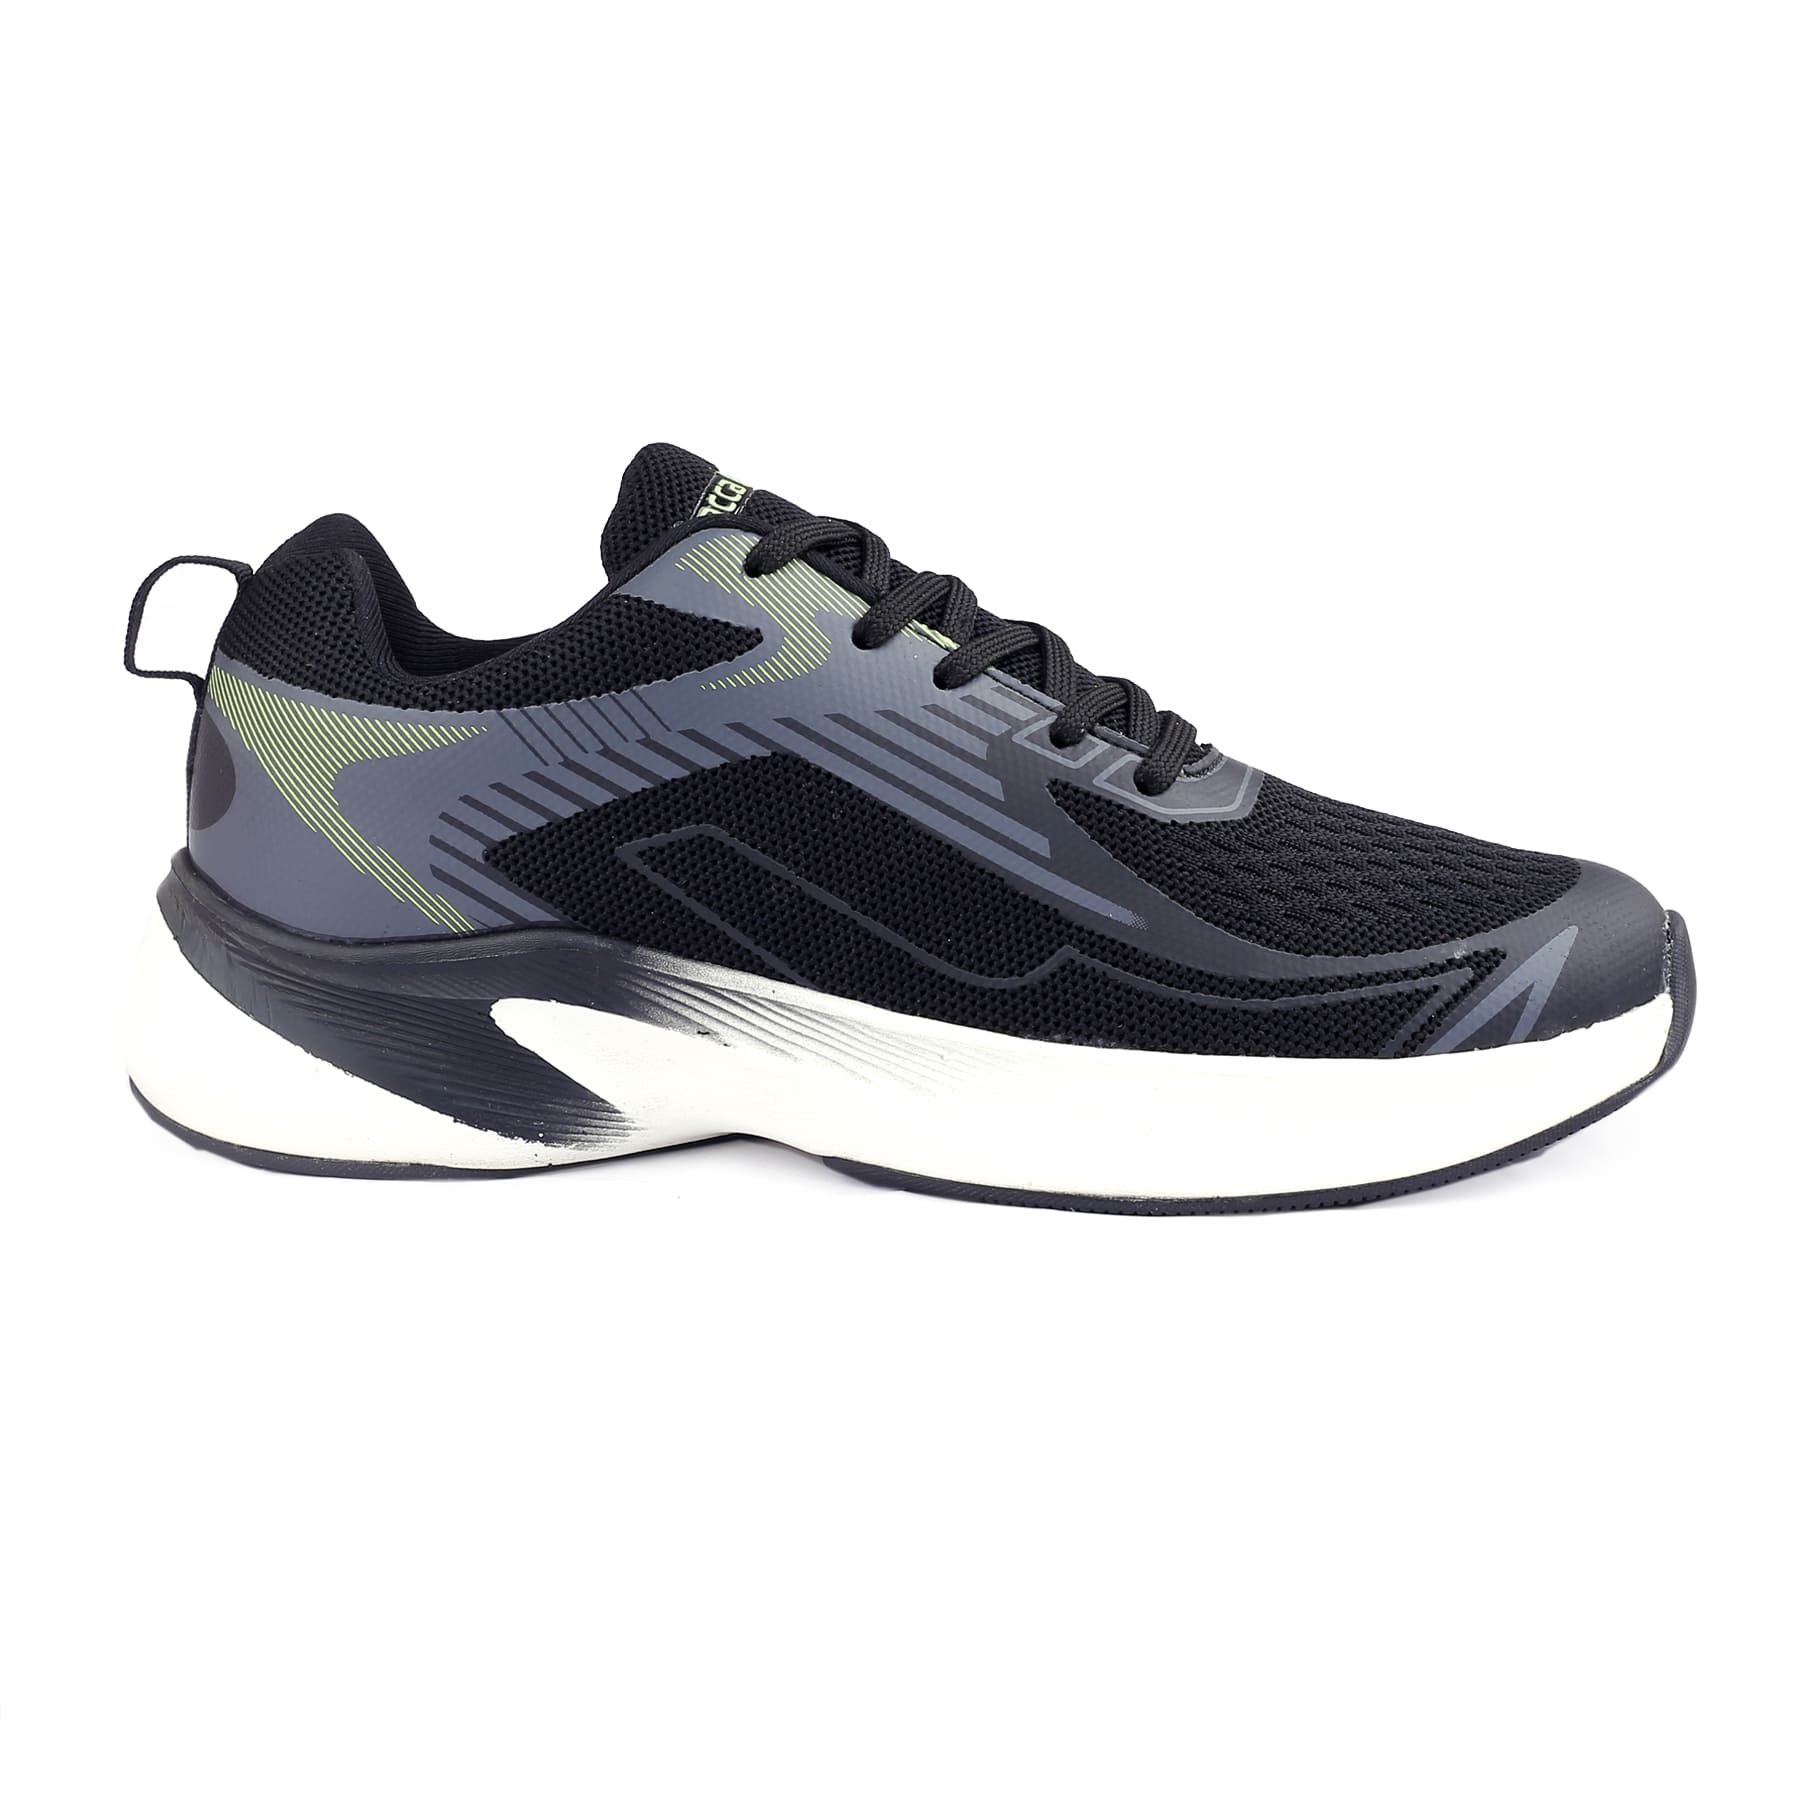 Bacca Bucci CARBON Training Shoes with High Abrasion Rubber Outsole